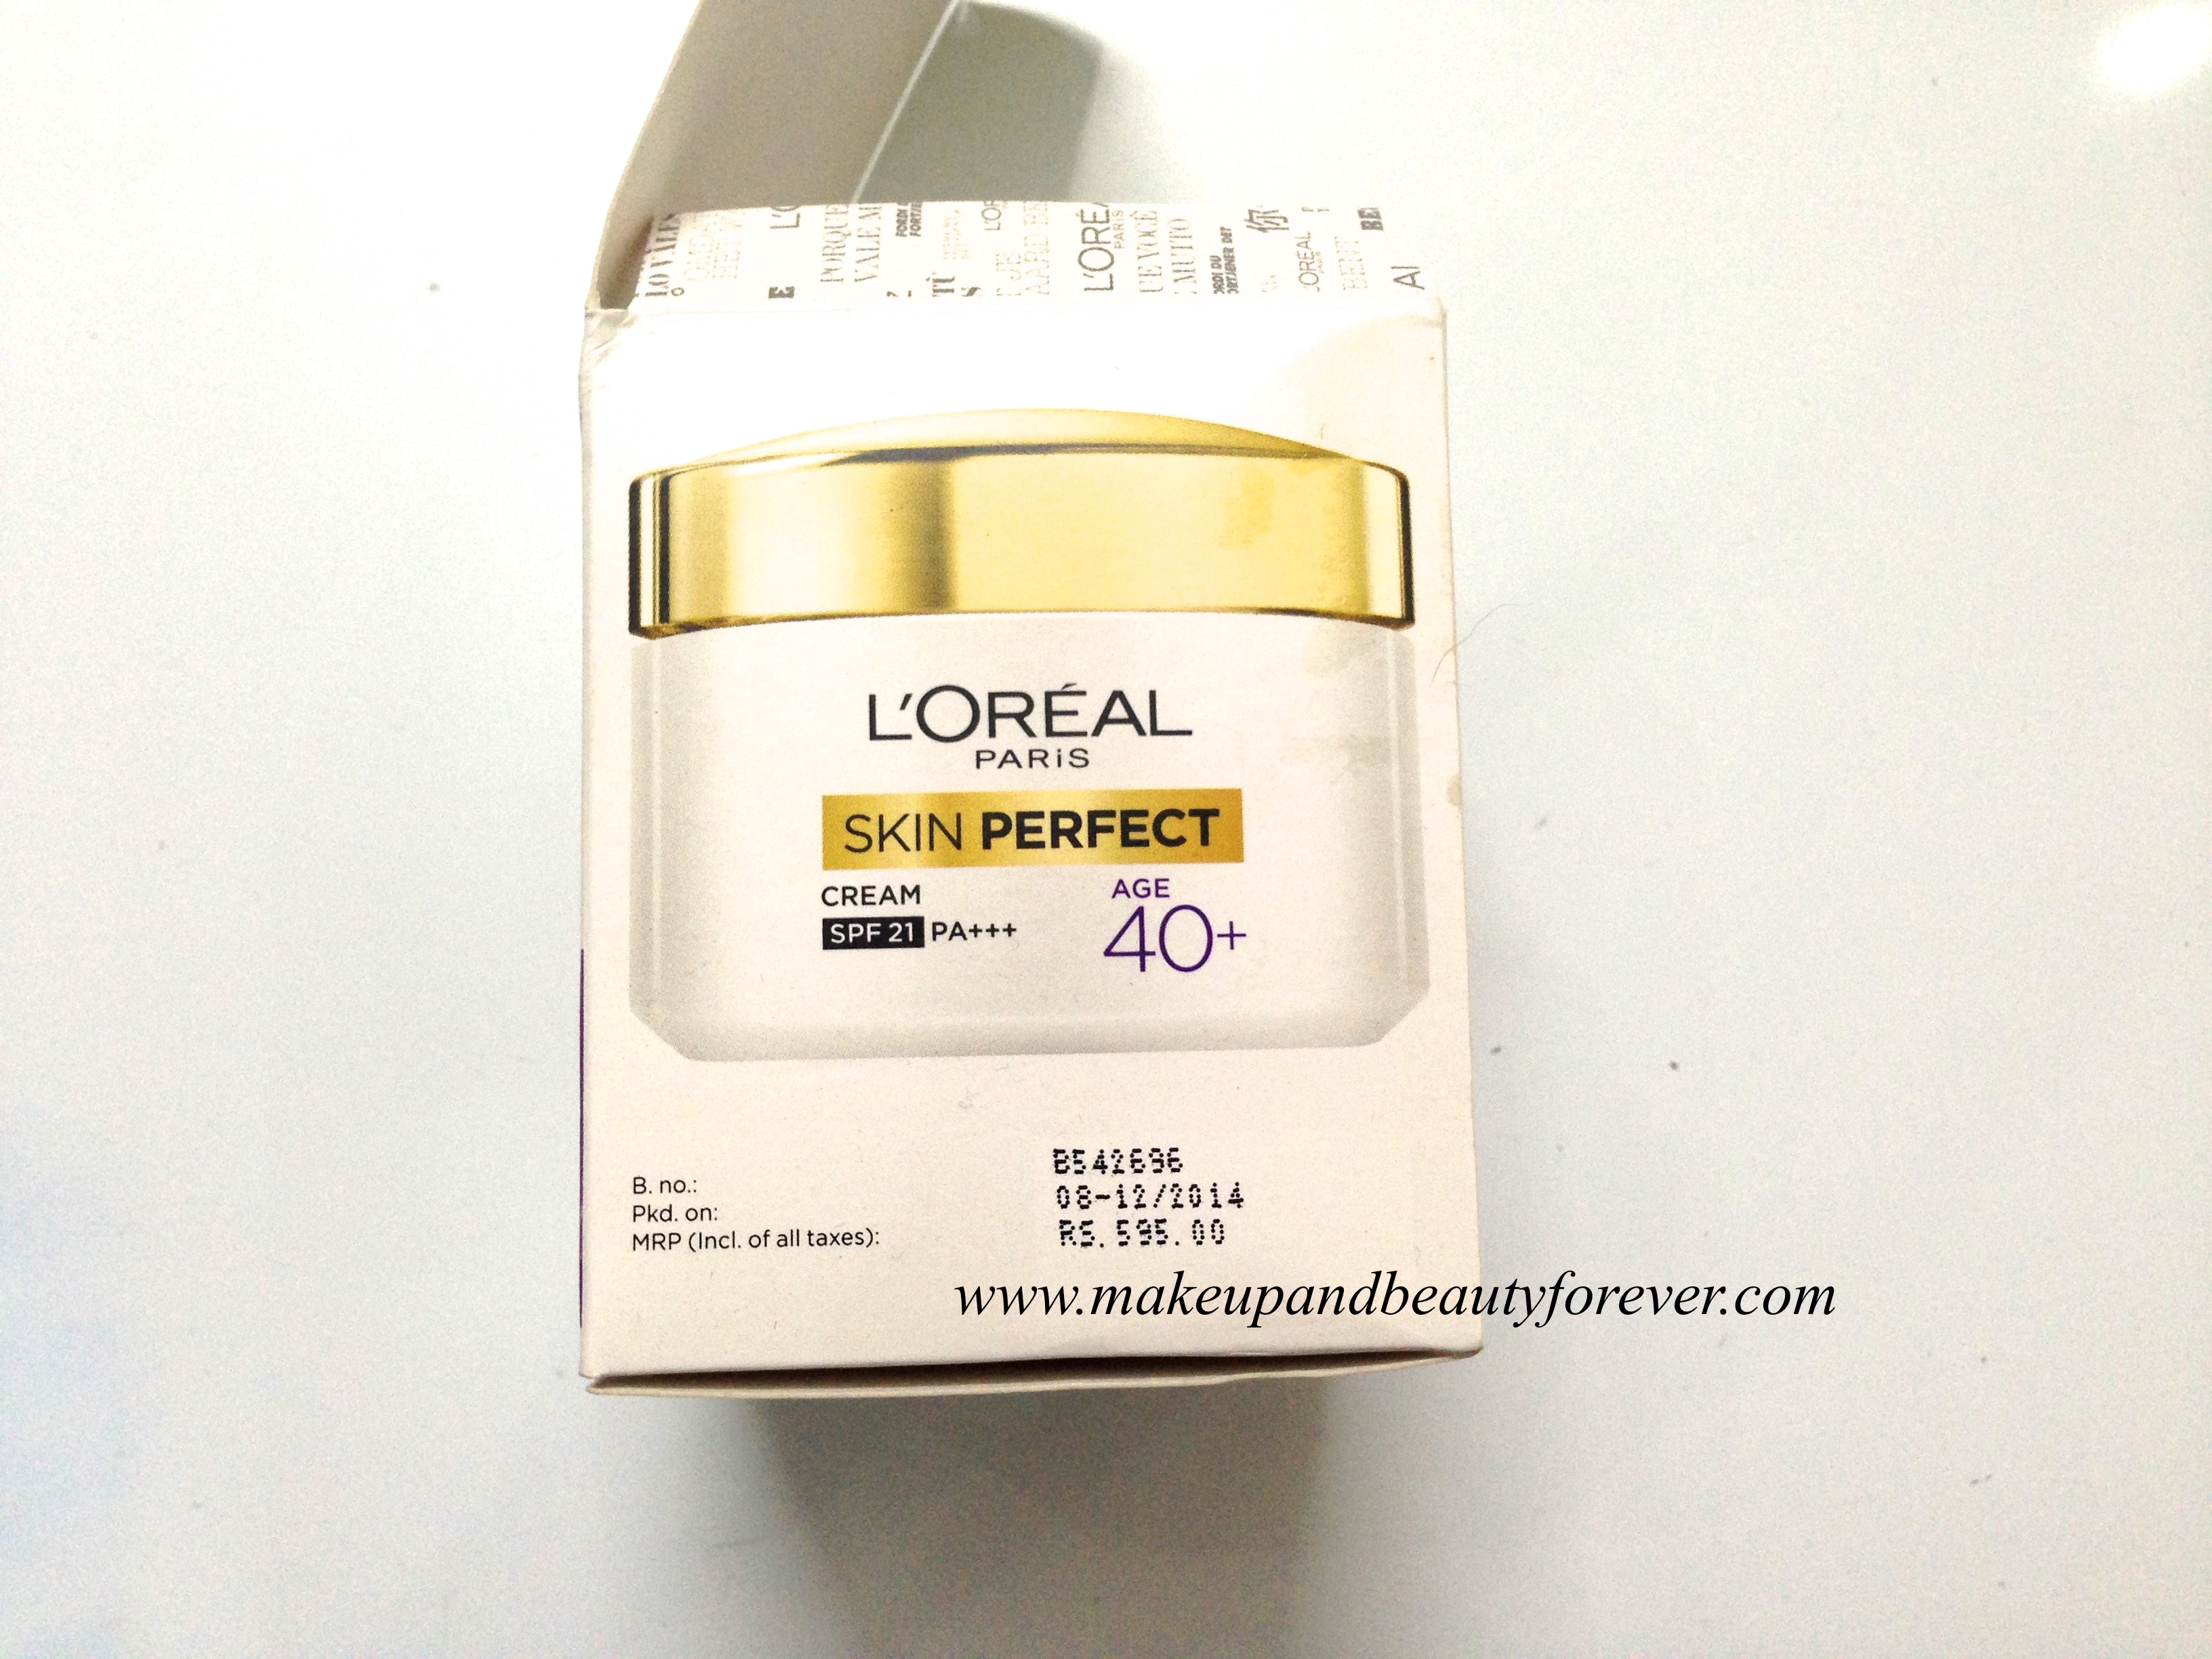 L'Oreal Paris Skin Perfect Anti-Aging + Whitening Cream For Age 40+ Review in India ...3264 x 2448